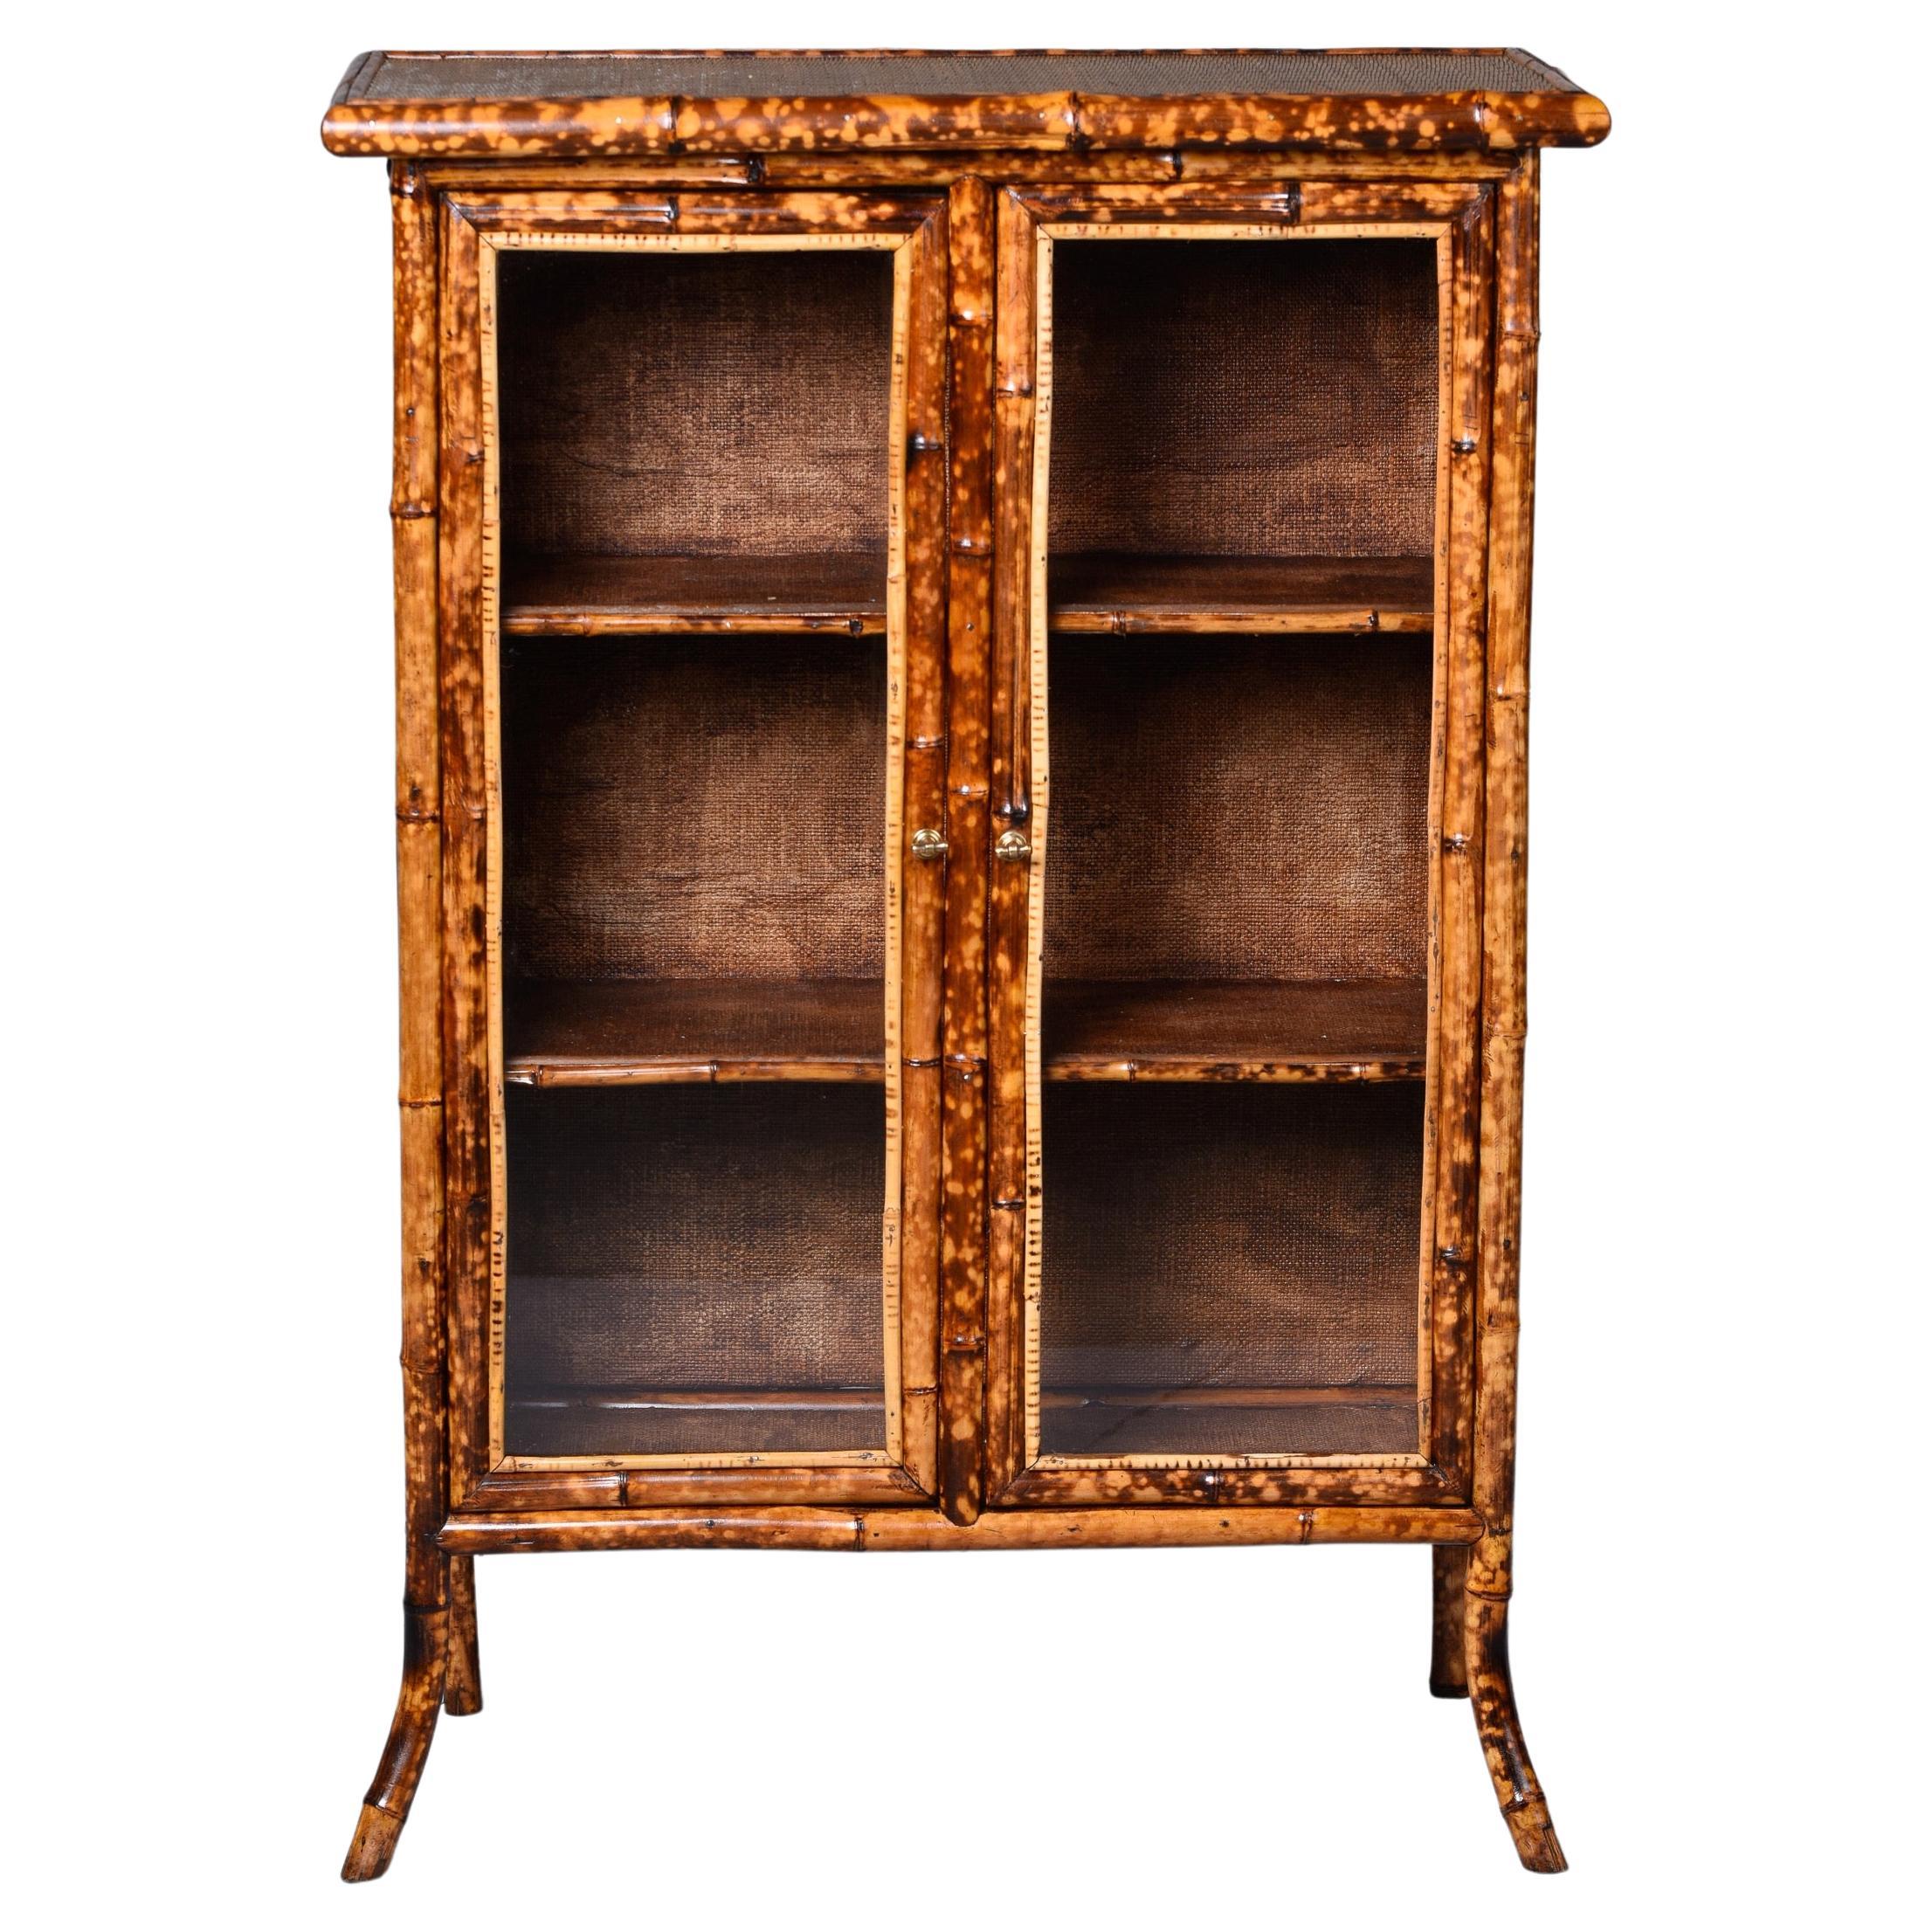 Two Door Glass Front Cabinet with Spotted Bamboo Frame